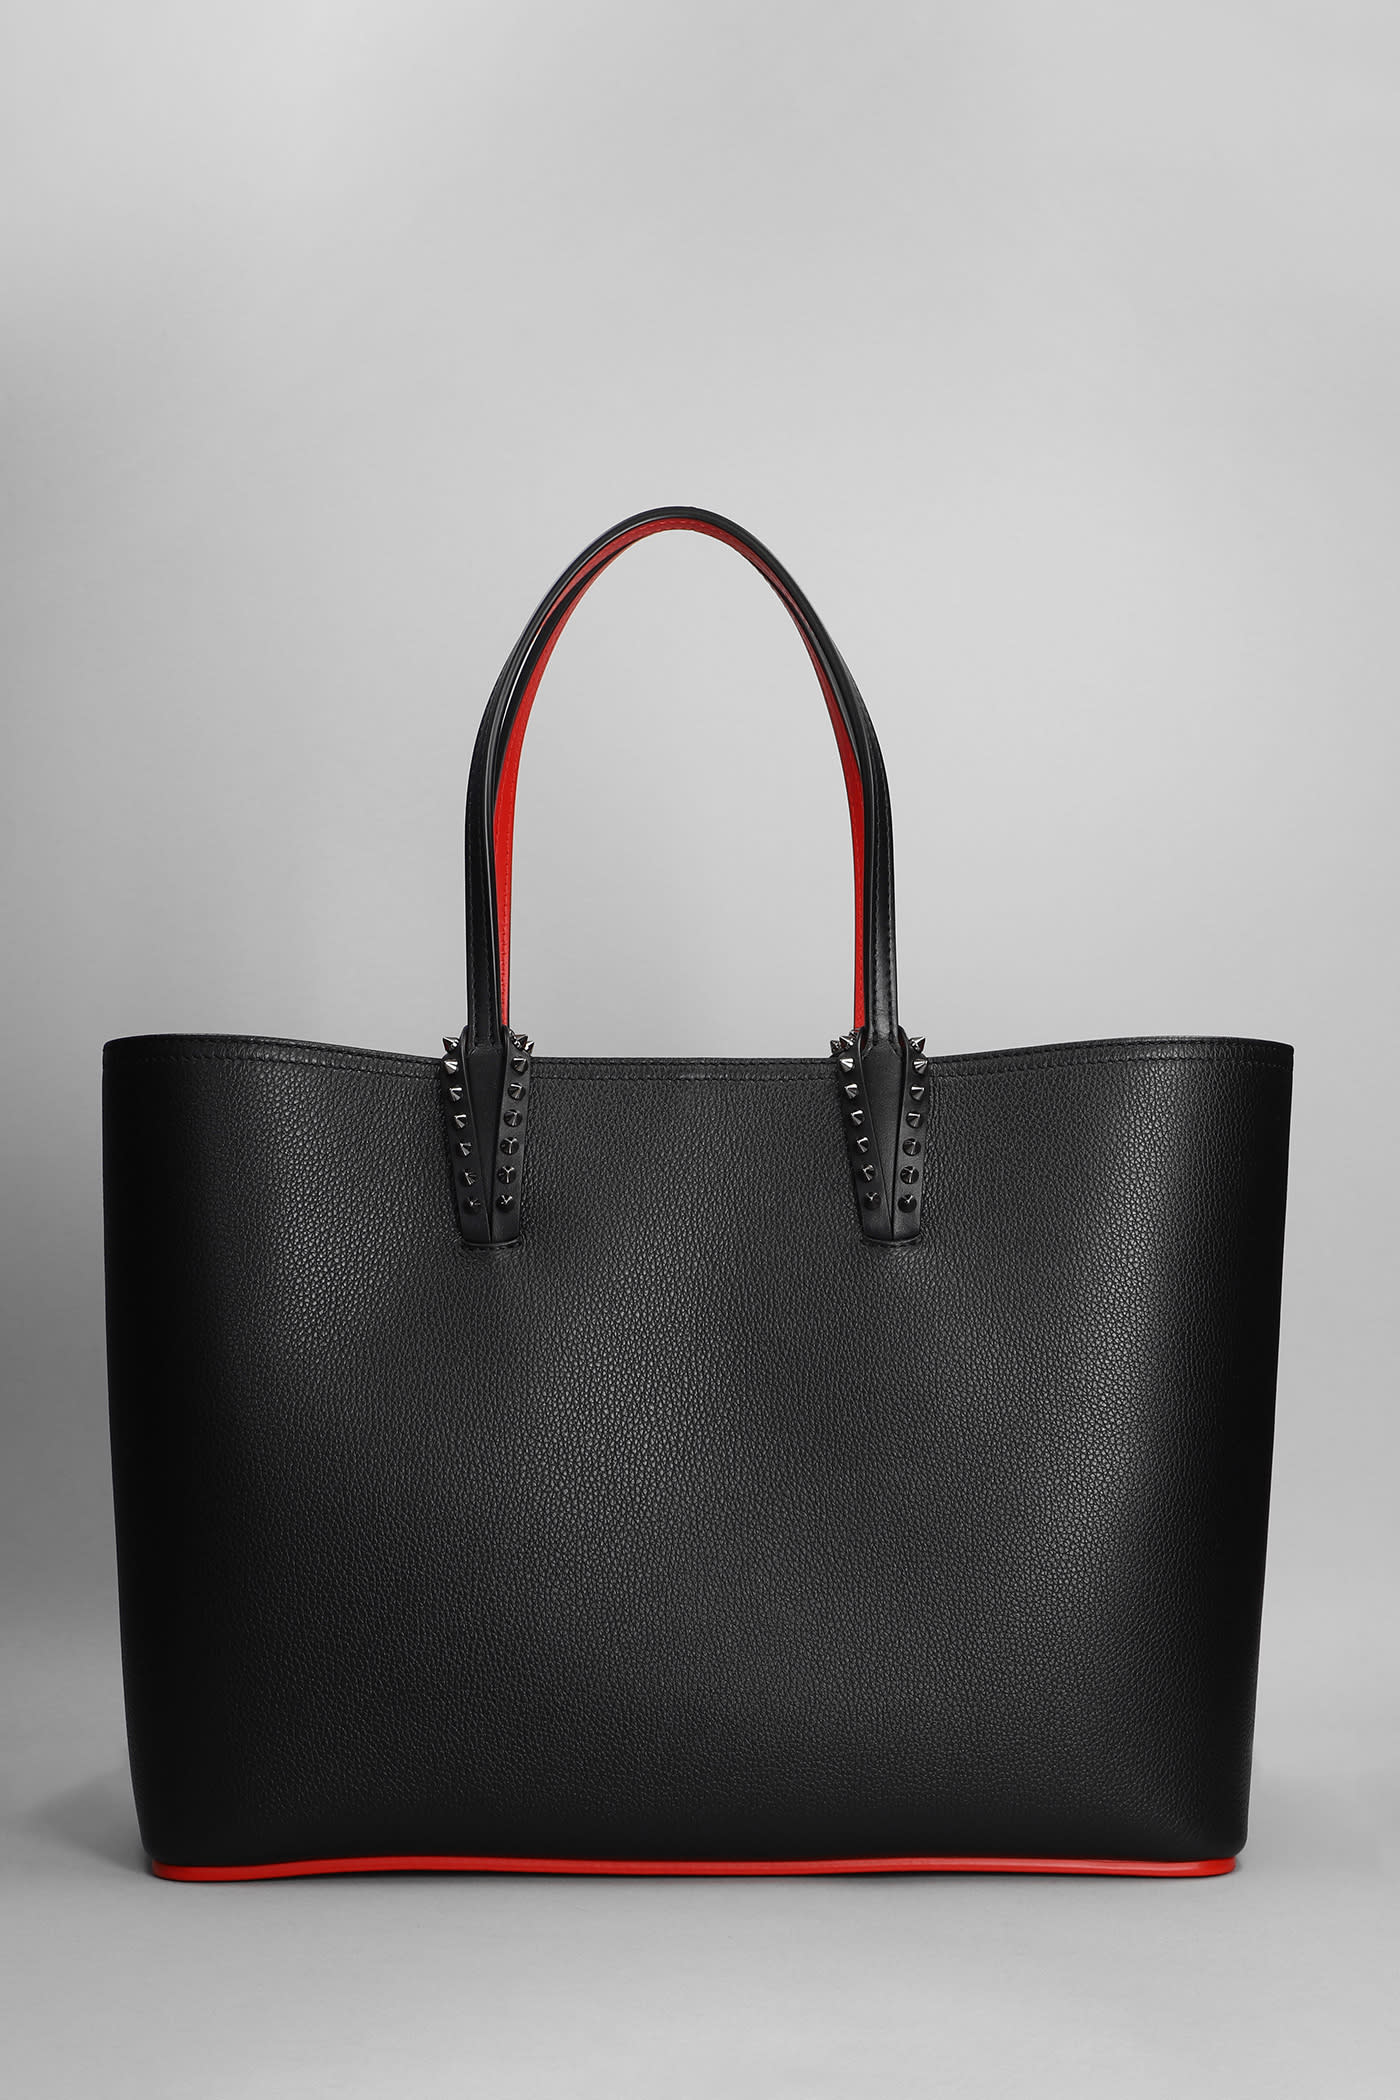 CHRISTIAN LOUBOUTIN CABATA TOTE IN BLACK LEATHER